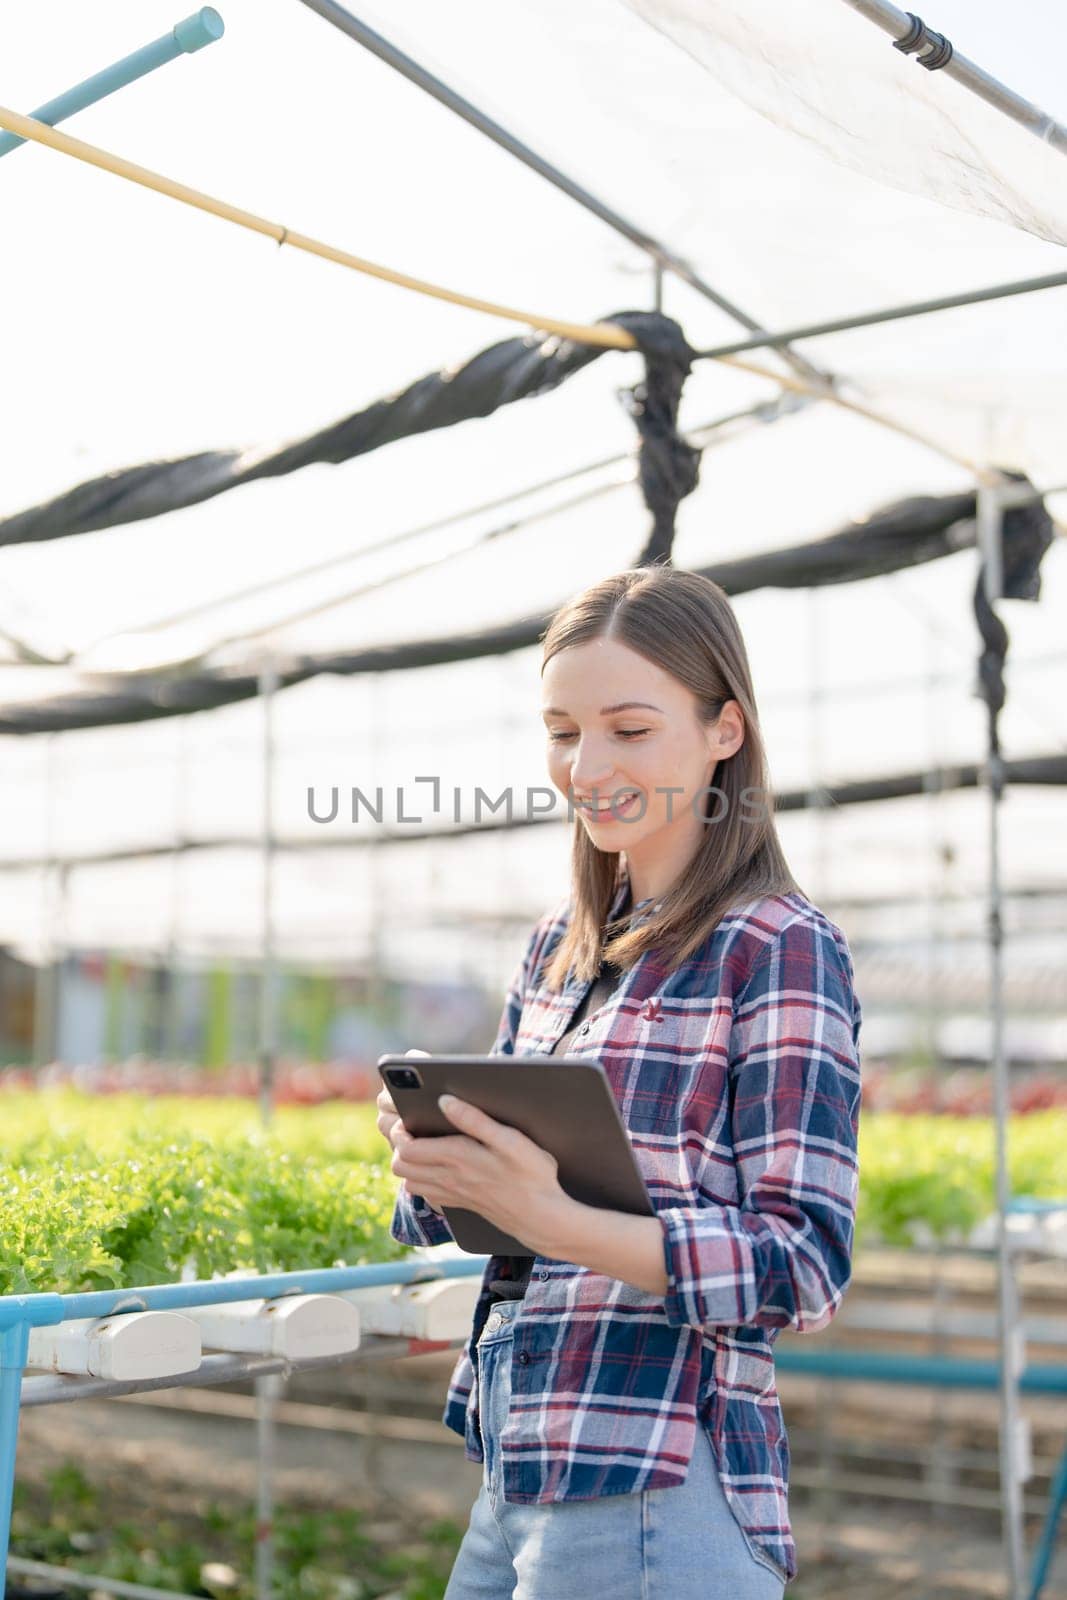 Female Farmer harvesting vegetable and audit quality from hydroponics farm. Organic fresh vegetable, Farmer working with hydroponic vegetables garden harvesting, small business concepts